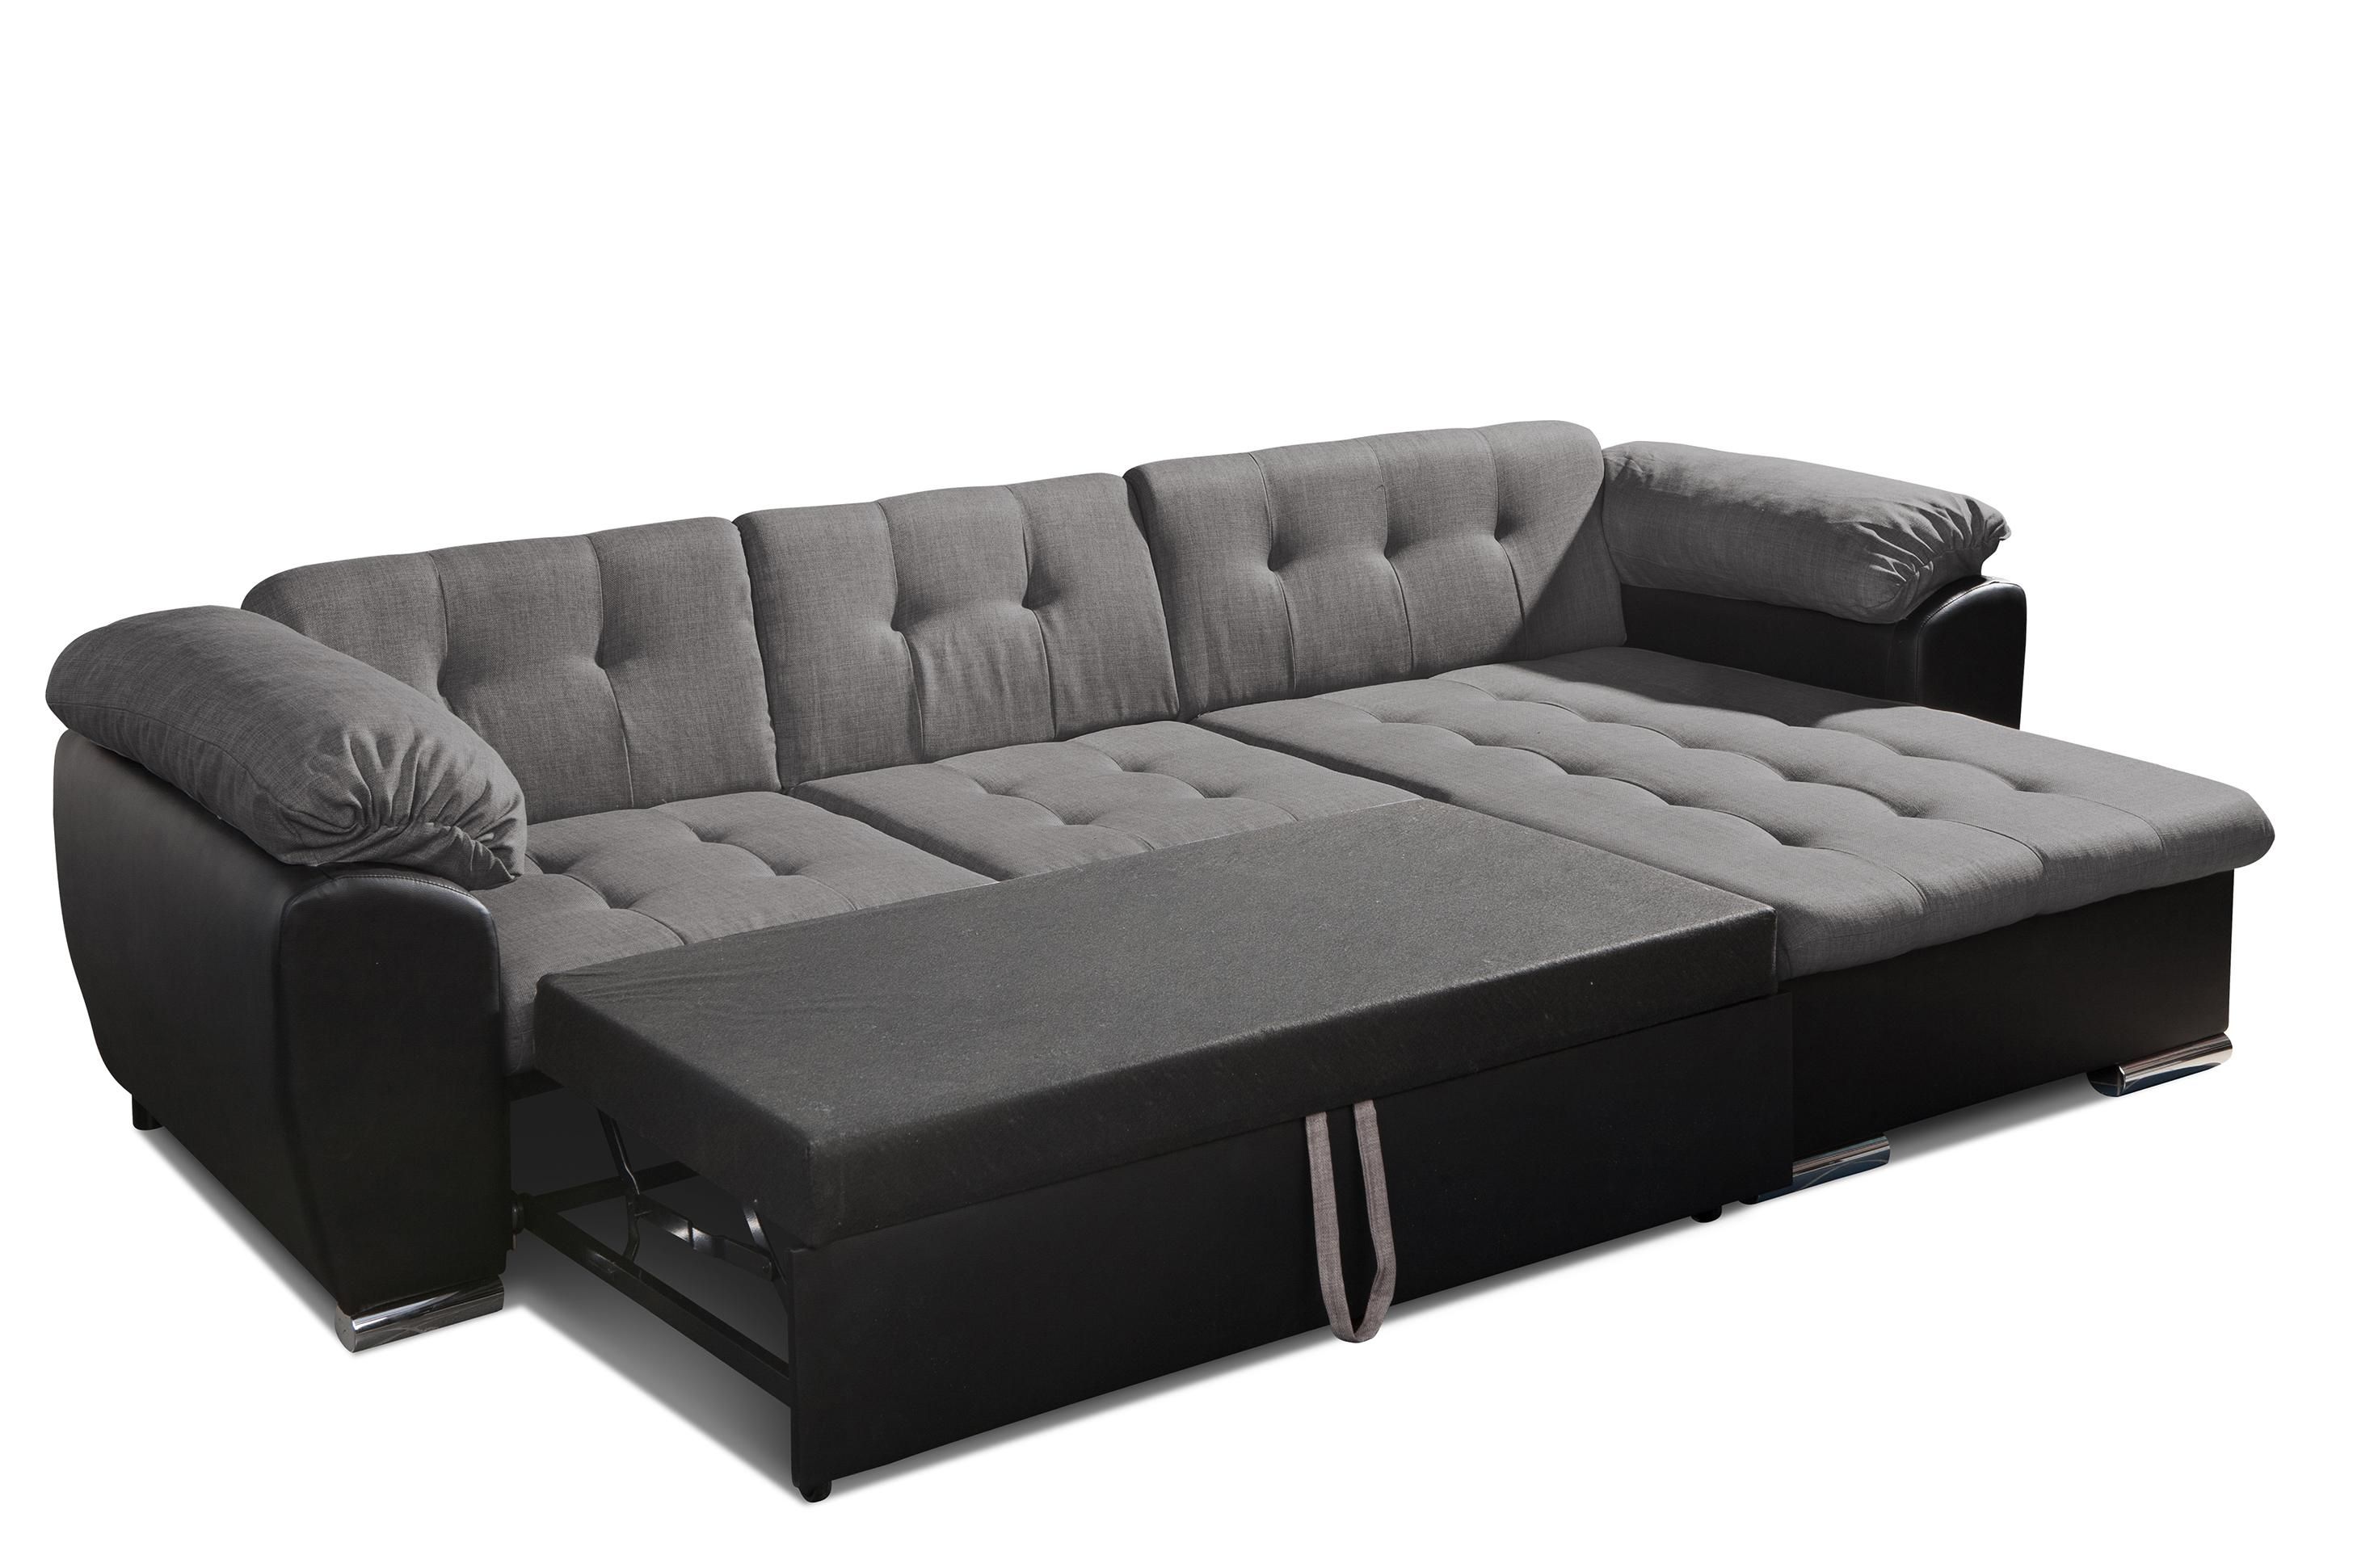 Furniture : Sectional Sleeper Sofa Loveseat Furniture Small Wrap Pertaining To Luxury Sofa Beds (View 16 of 20)